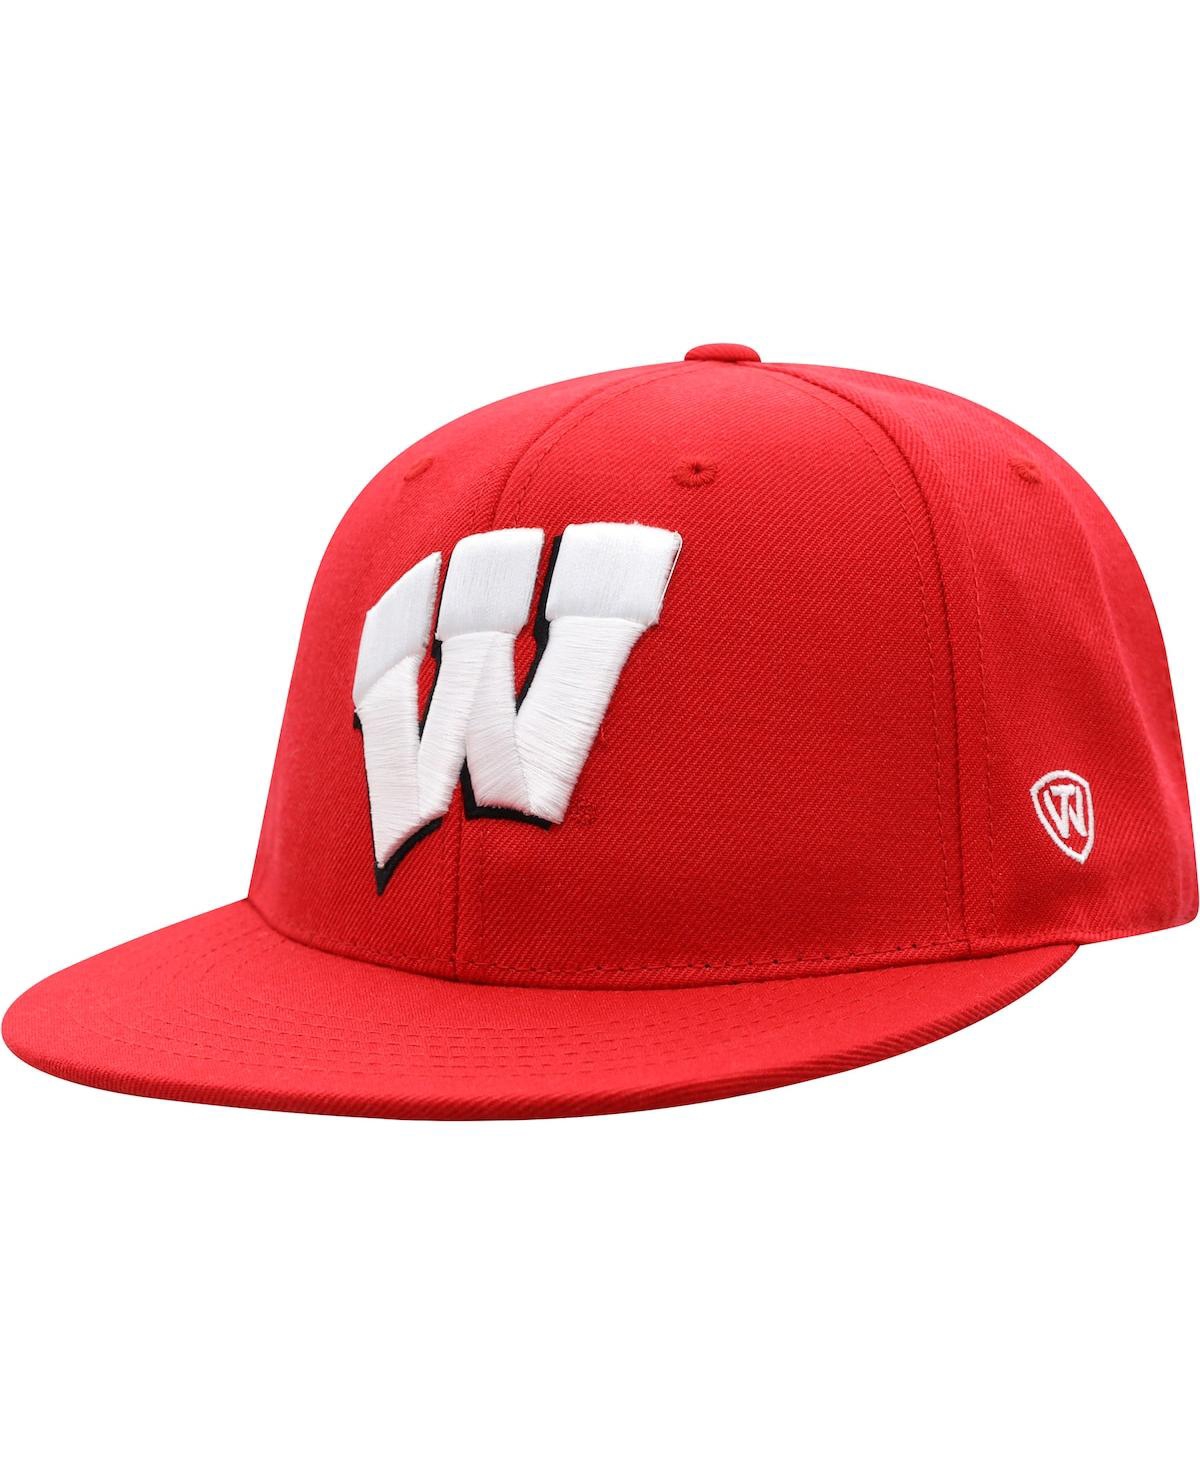 Men's Top of the World Red Wisconsin Badgers Team Color Fitted Hat - Red